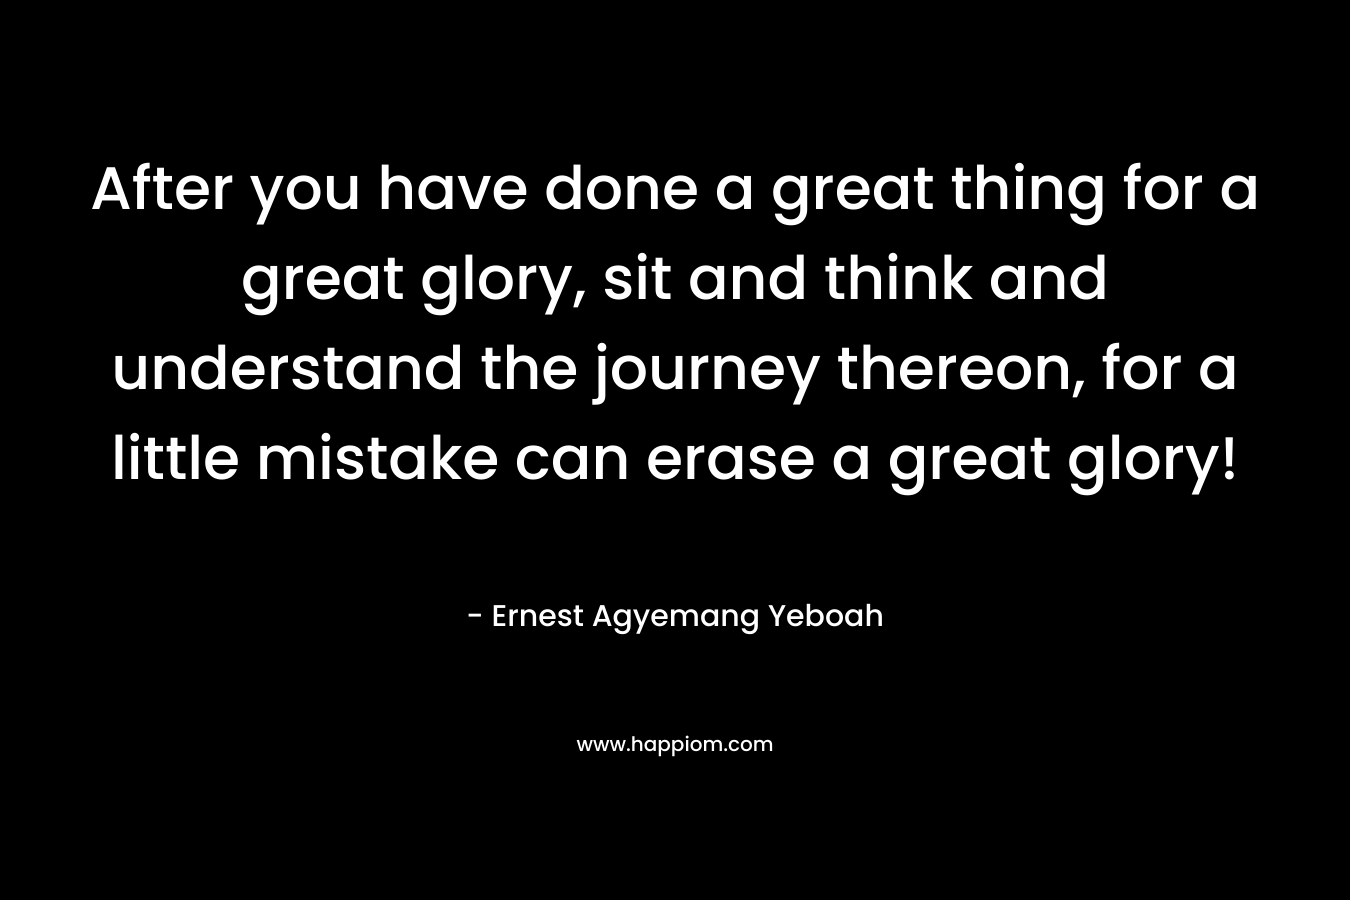 After you have done a great thing for a great glory, sit and think and understand the journey thereon, for a little mistake can erase a great glory!